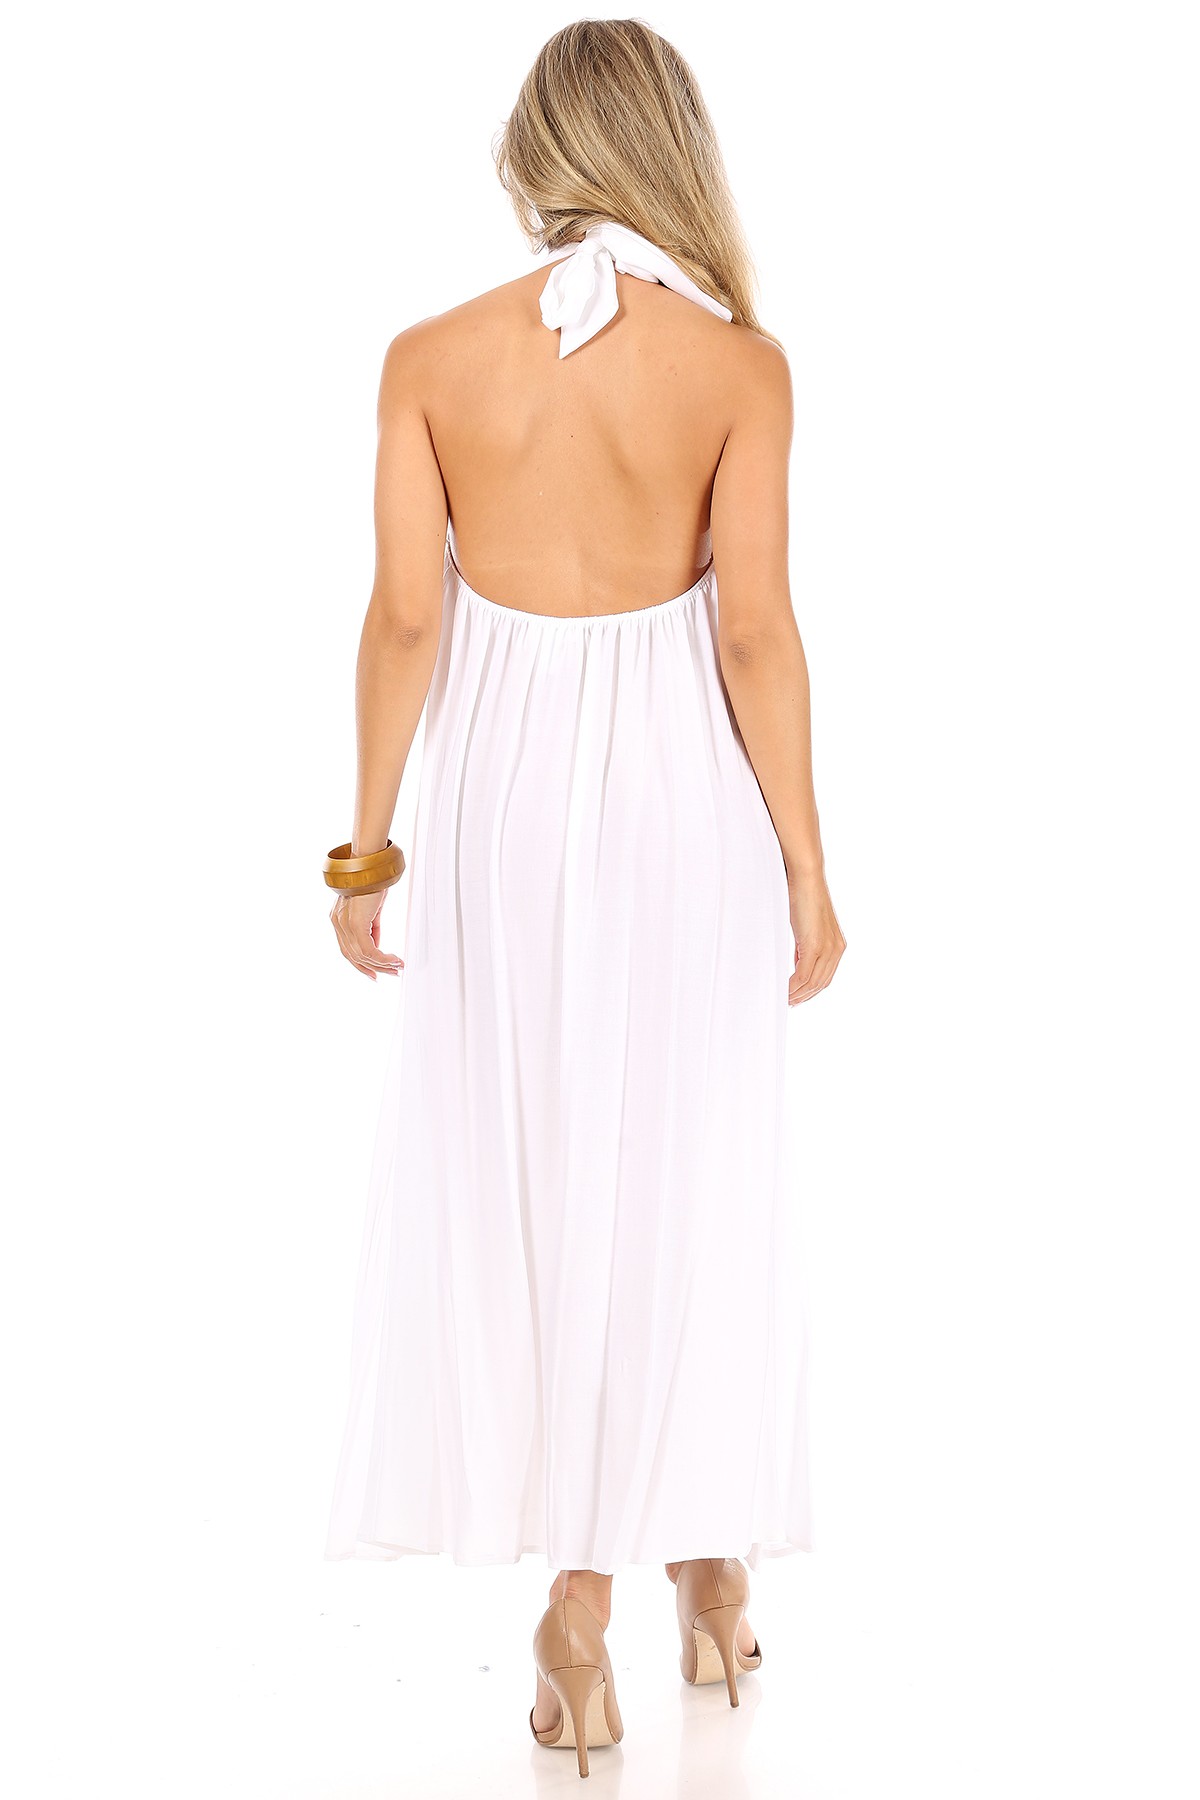 All Eyes On Me Collection - Linen Halter Maxi Dress - White